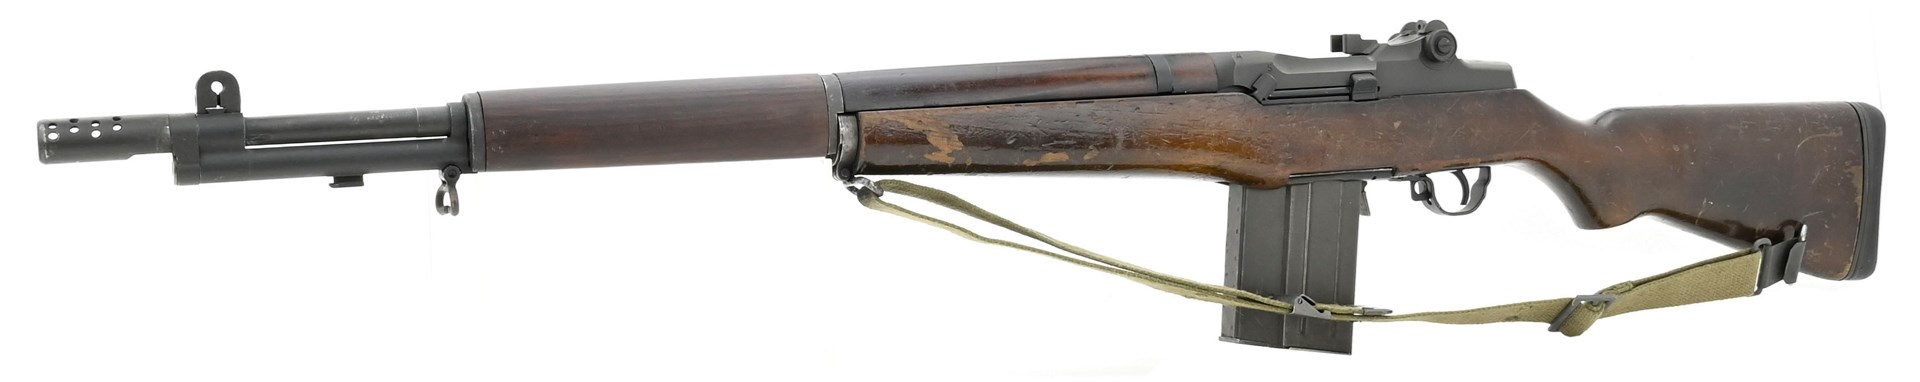 Left side view of a BM-59E assembled using an Argentine parts kit and a Beretta receiver.  Photograph by Jeff Hallinan